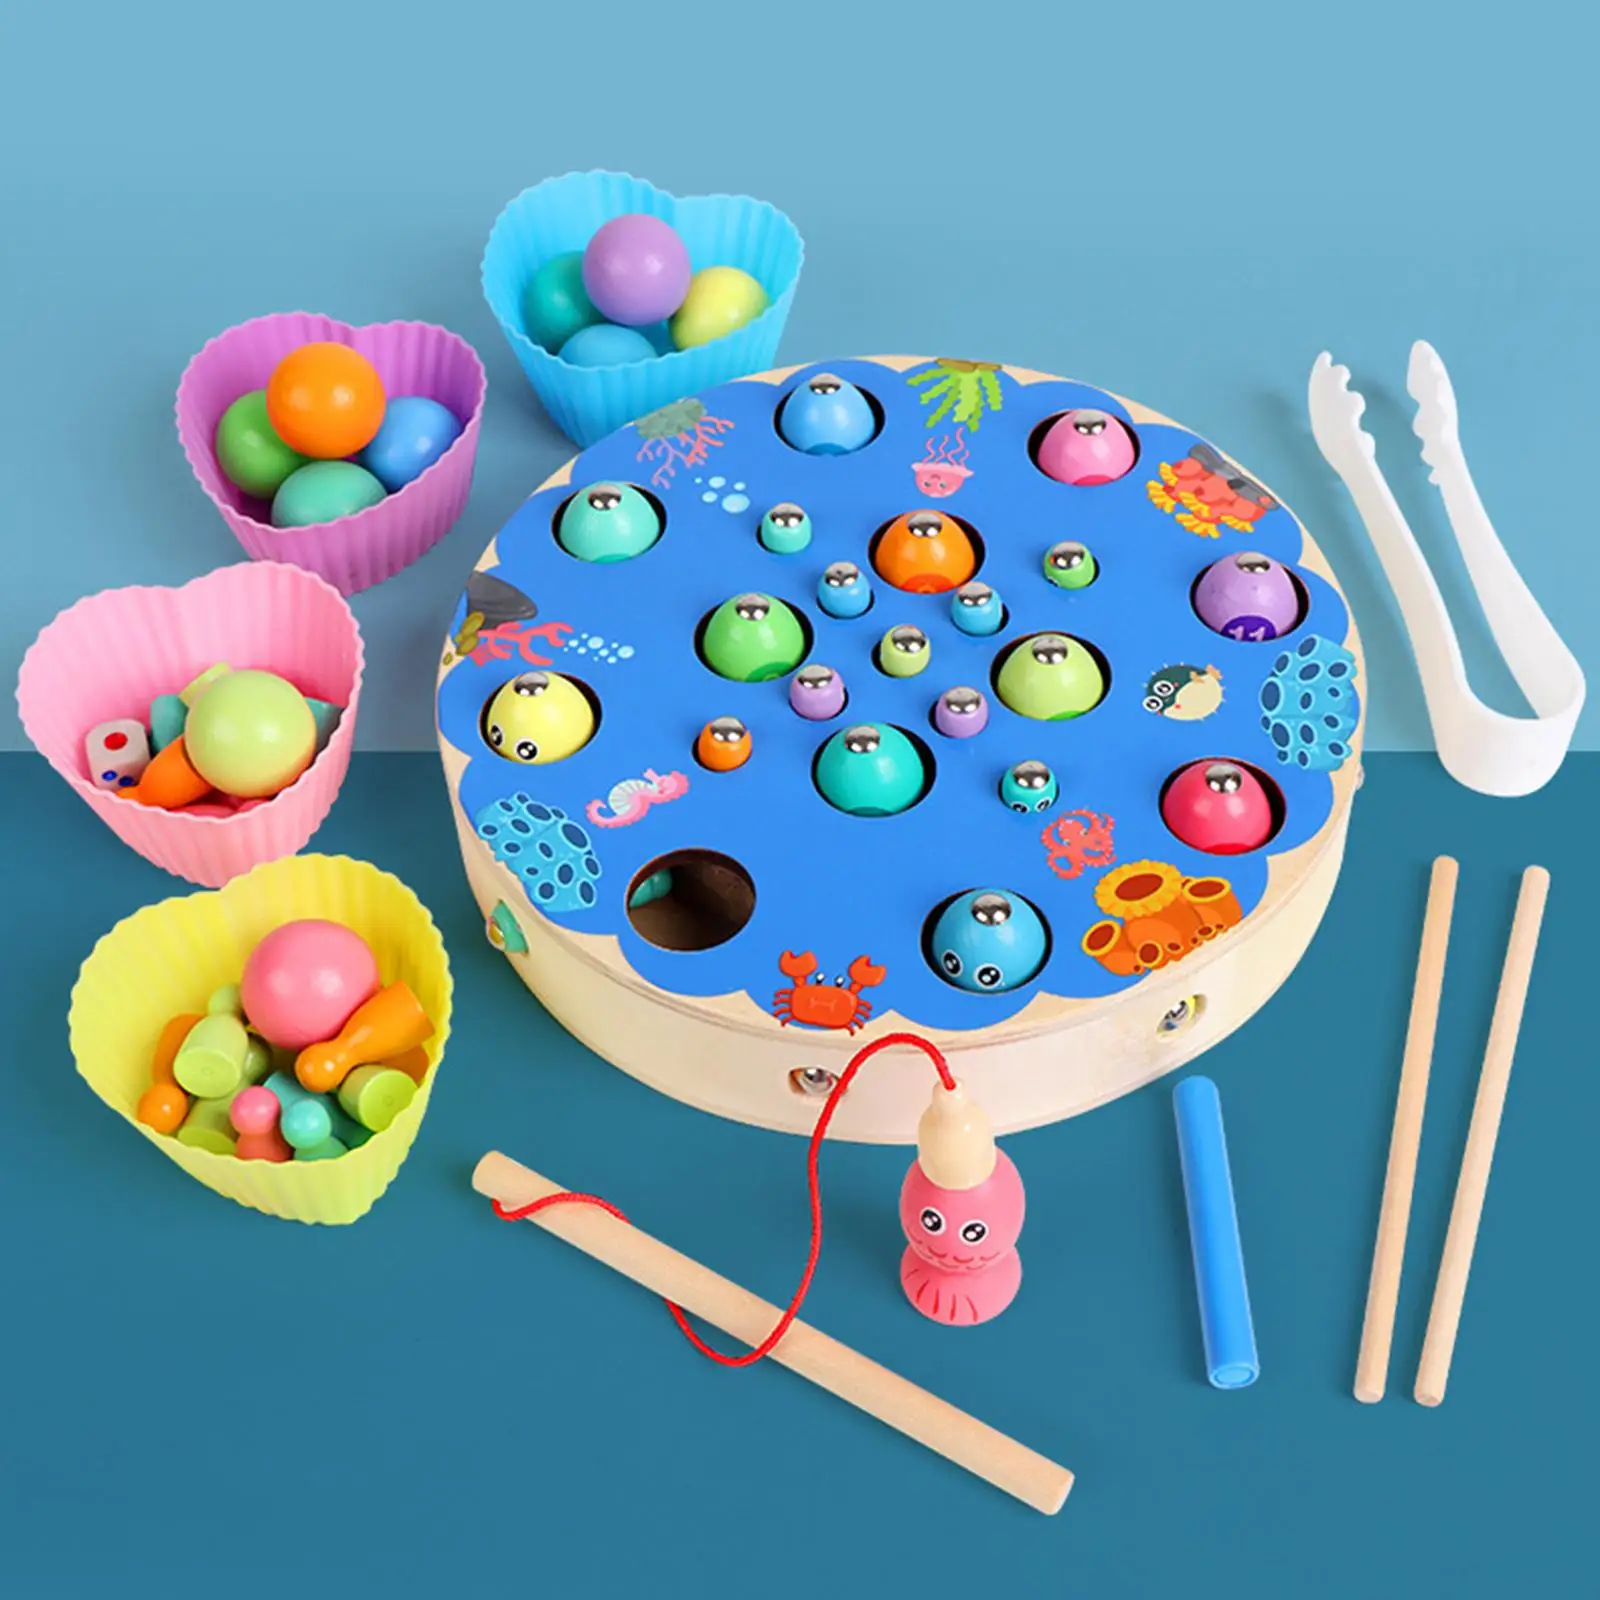 Multicolor Wooden Fishing Game Fishing Pole Chopsticks Fine Motor Skill Learning Toy for Game Teaching Indoor Birthday Activity